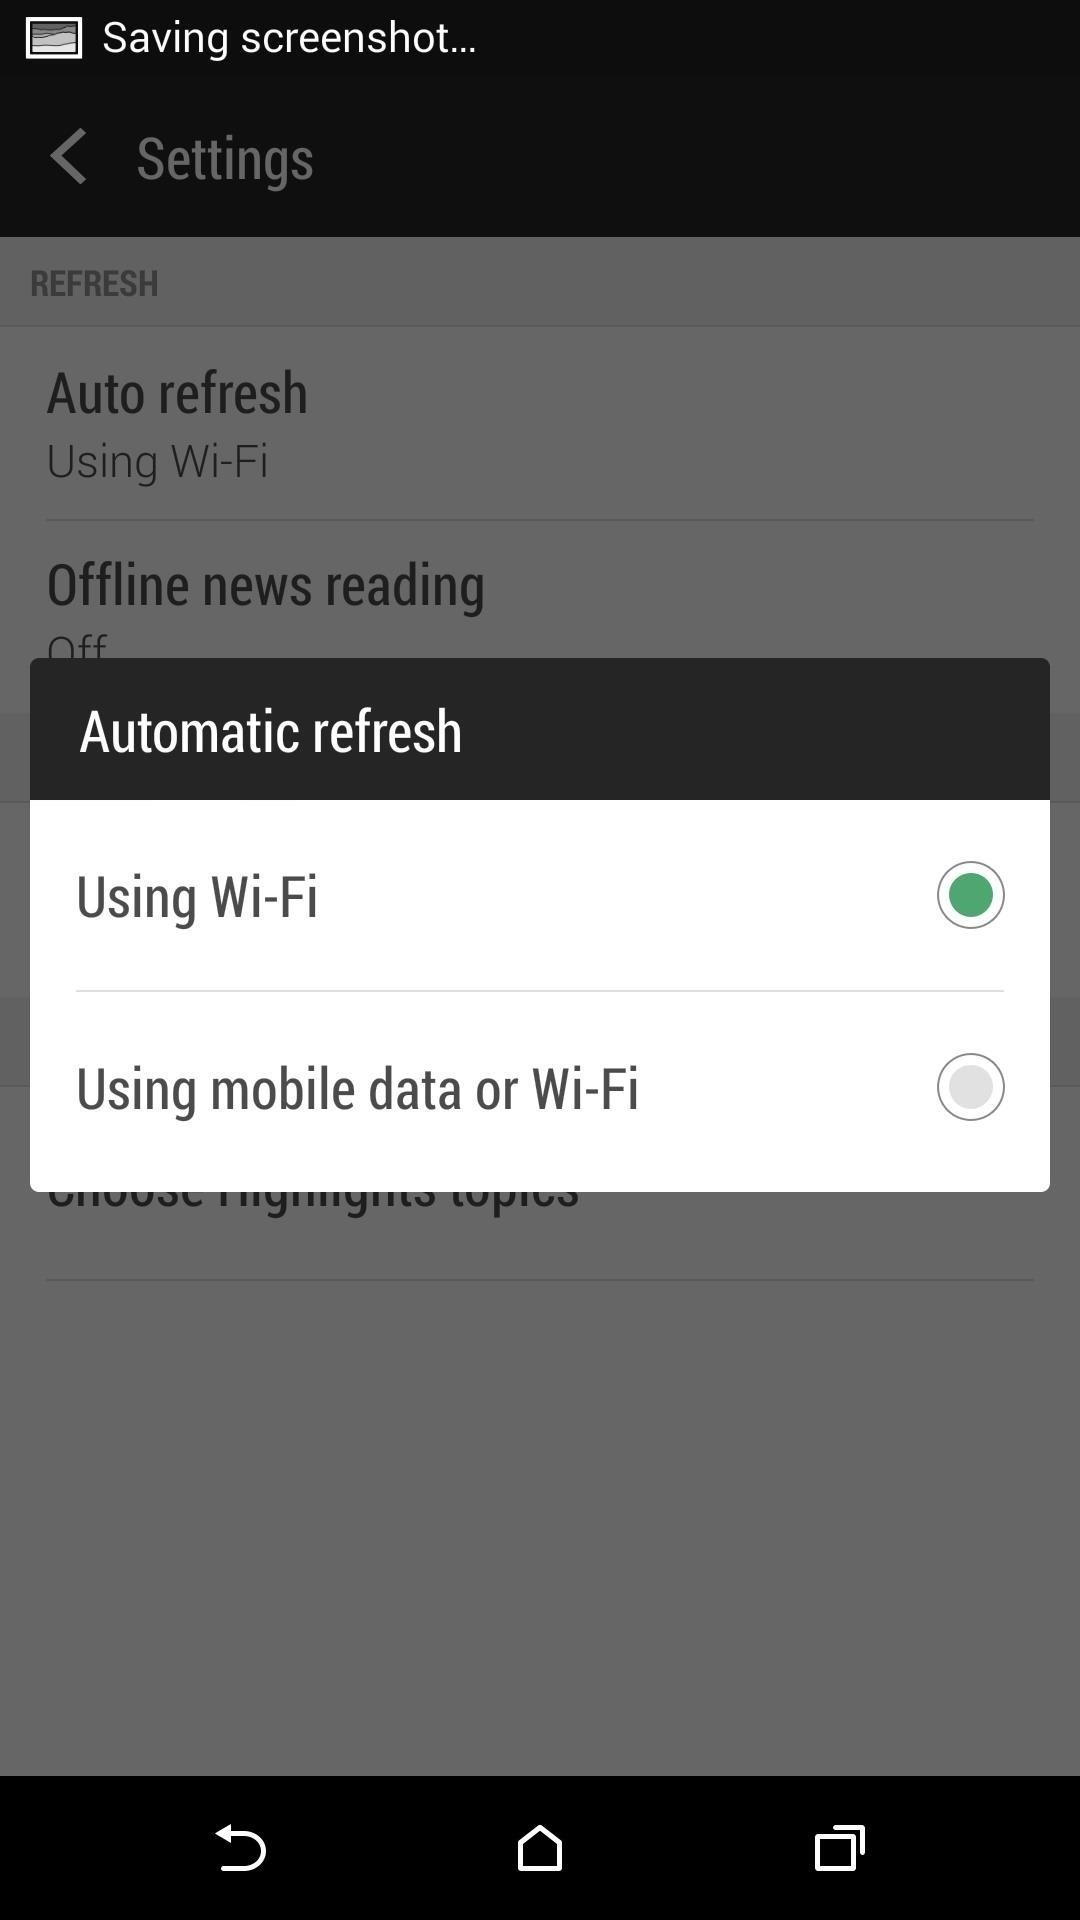 Make Your HTC One’s Battery Last All Day Long Using These Power-Saving Settings